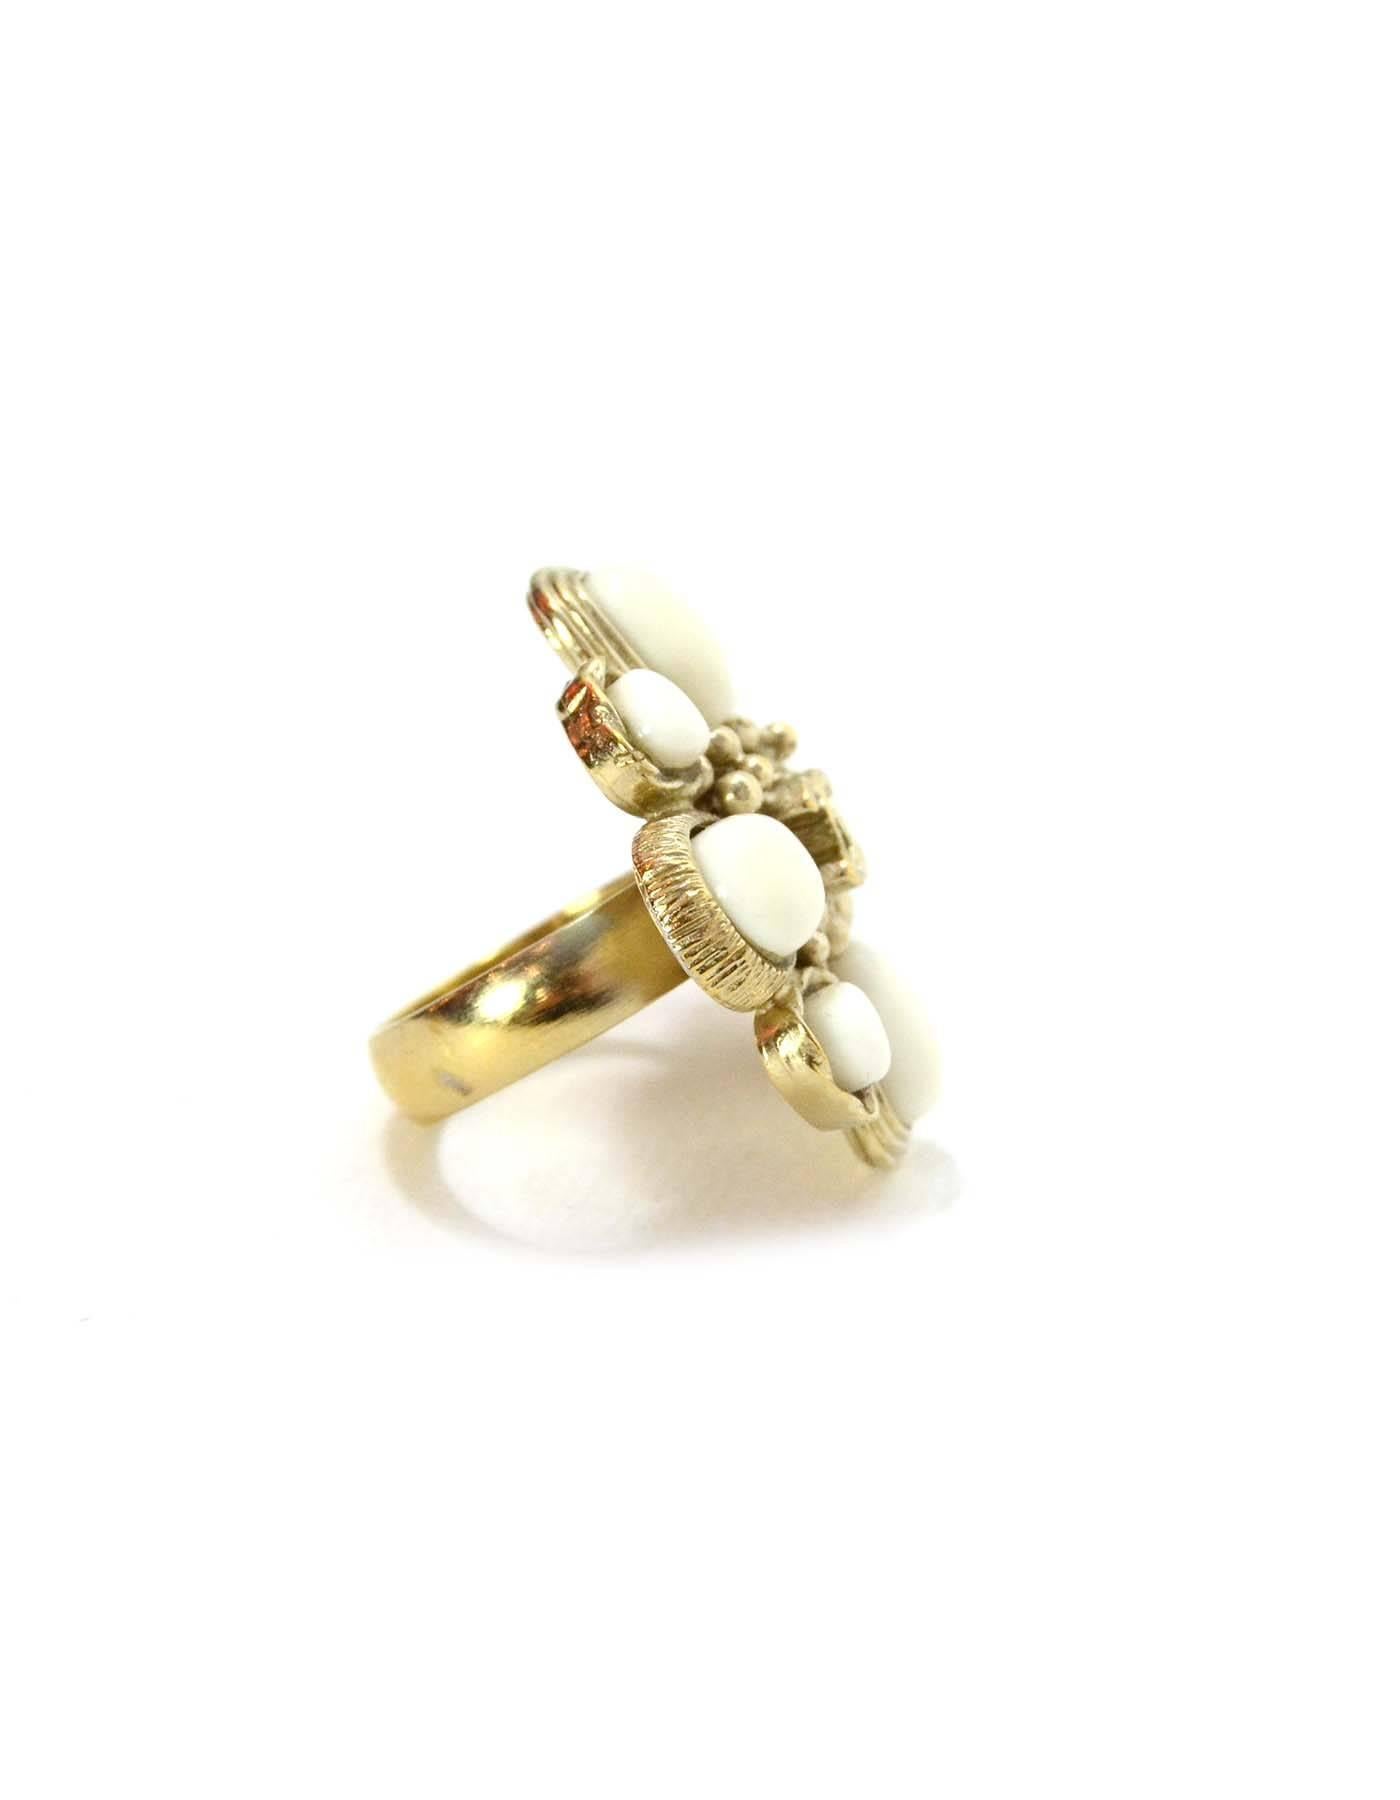 Chanel Gold & White Flower Cocktail Ring 
Features goldtone CC in center of flower
Made In: Italy
Color: Pale gold and white
Materials: Metal and glass
Closure: None
Stamp: 09 CC P
Overall Condition: Excellent pre-owned condition
Size: